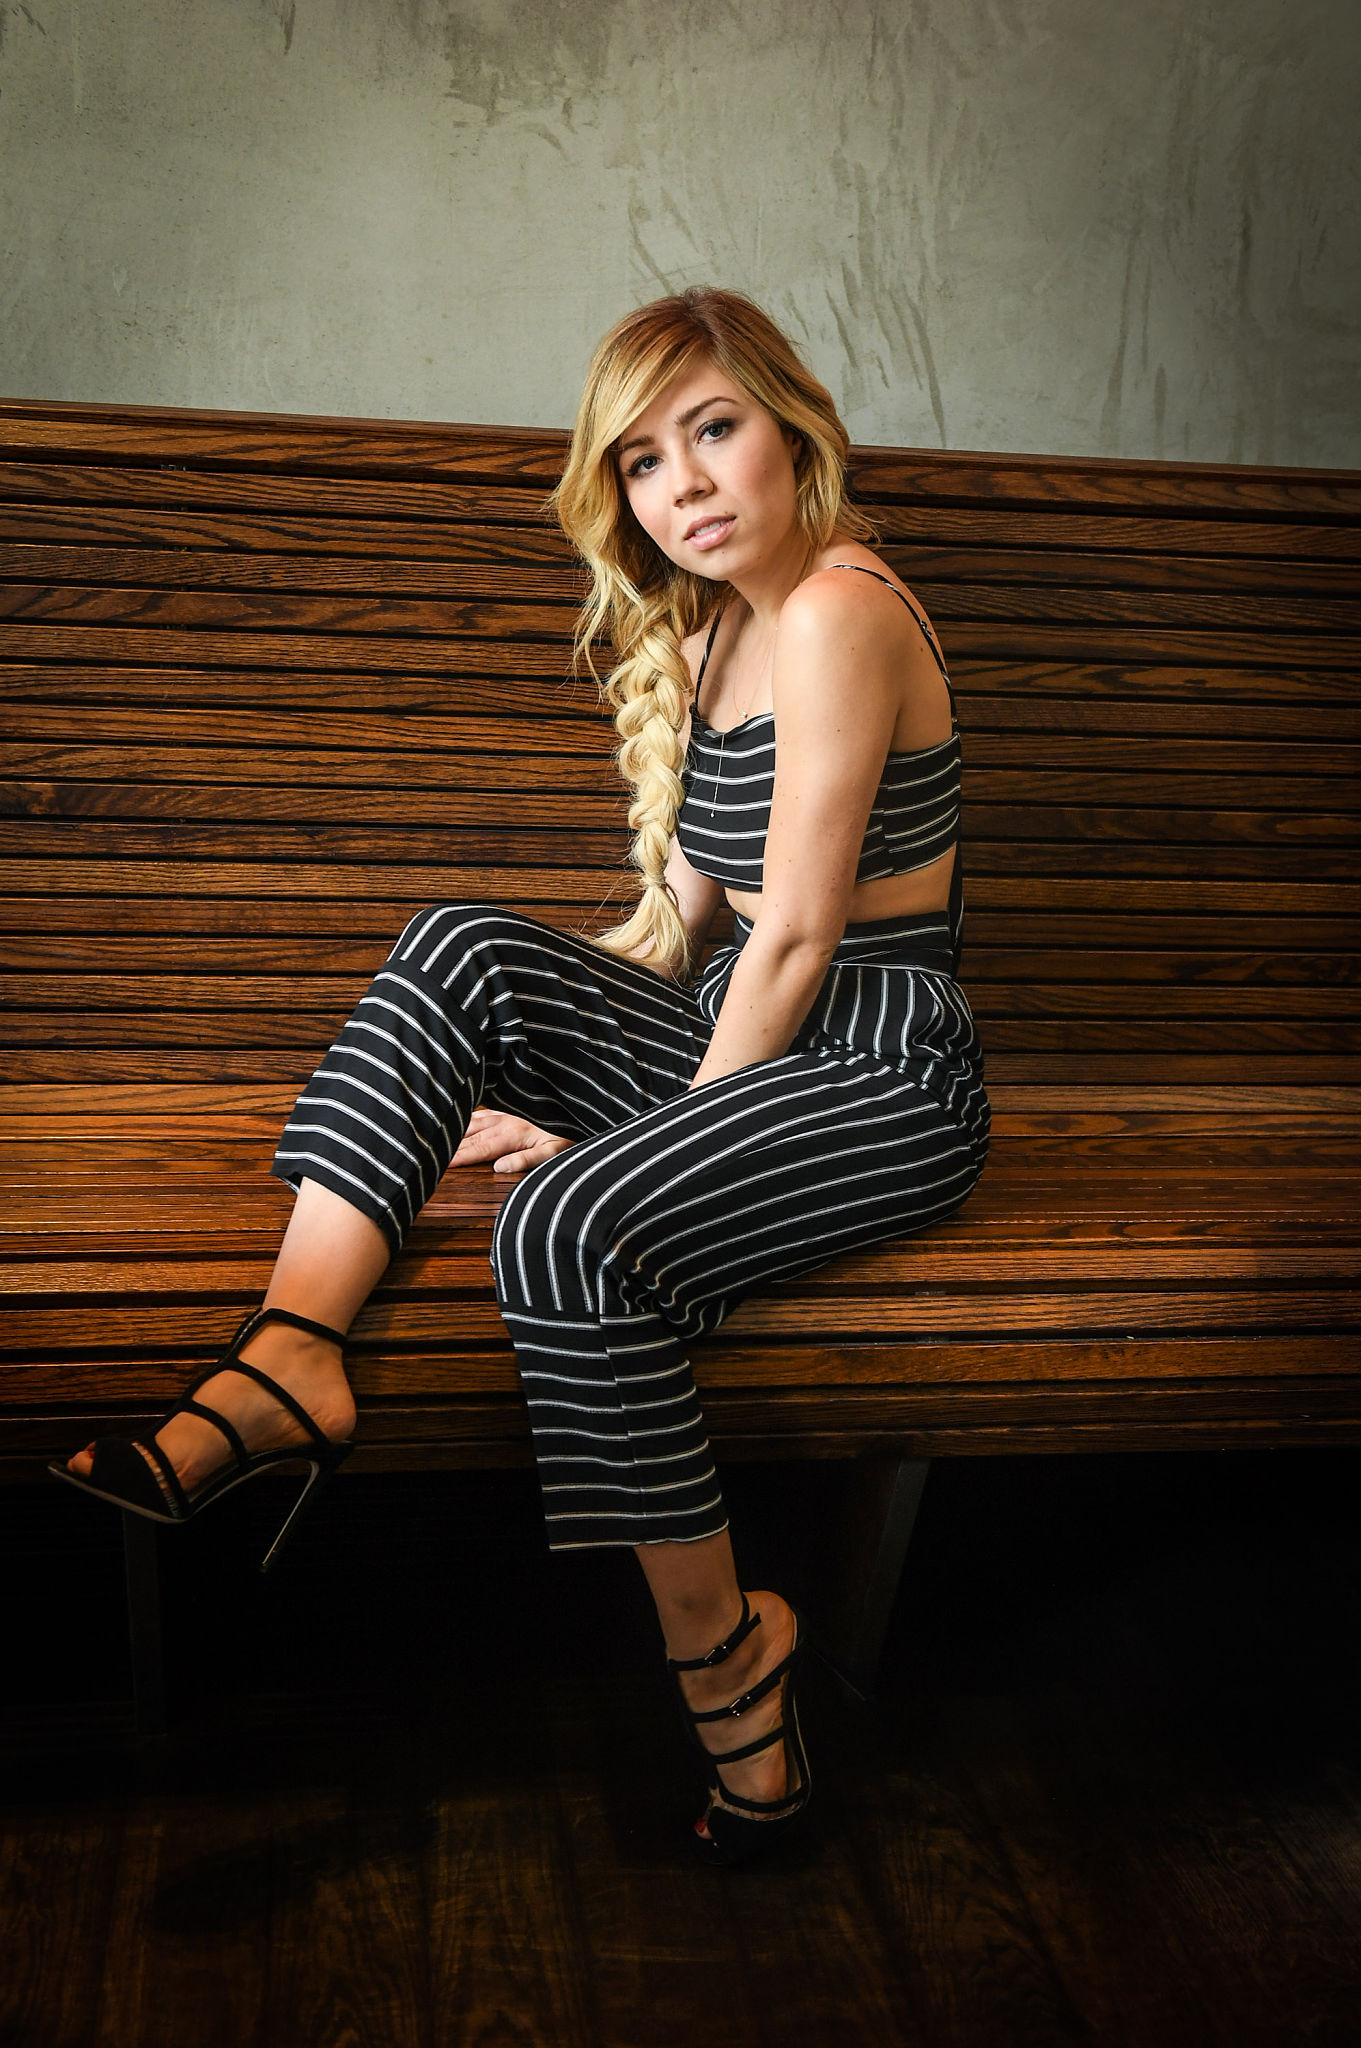 Jennette Mccurdy Обои With Tights Entitled Jennette - Jennette Mccurdy Leg , HD Wallpaper & Backgrounds